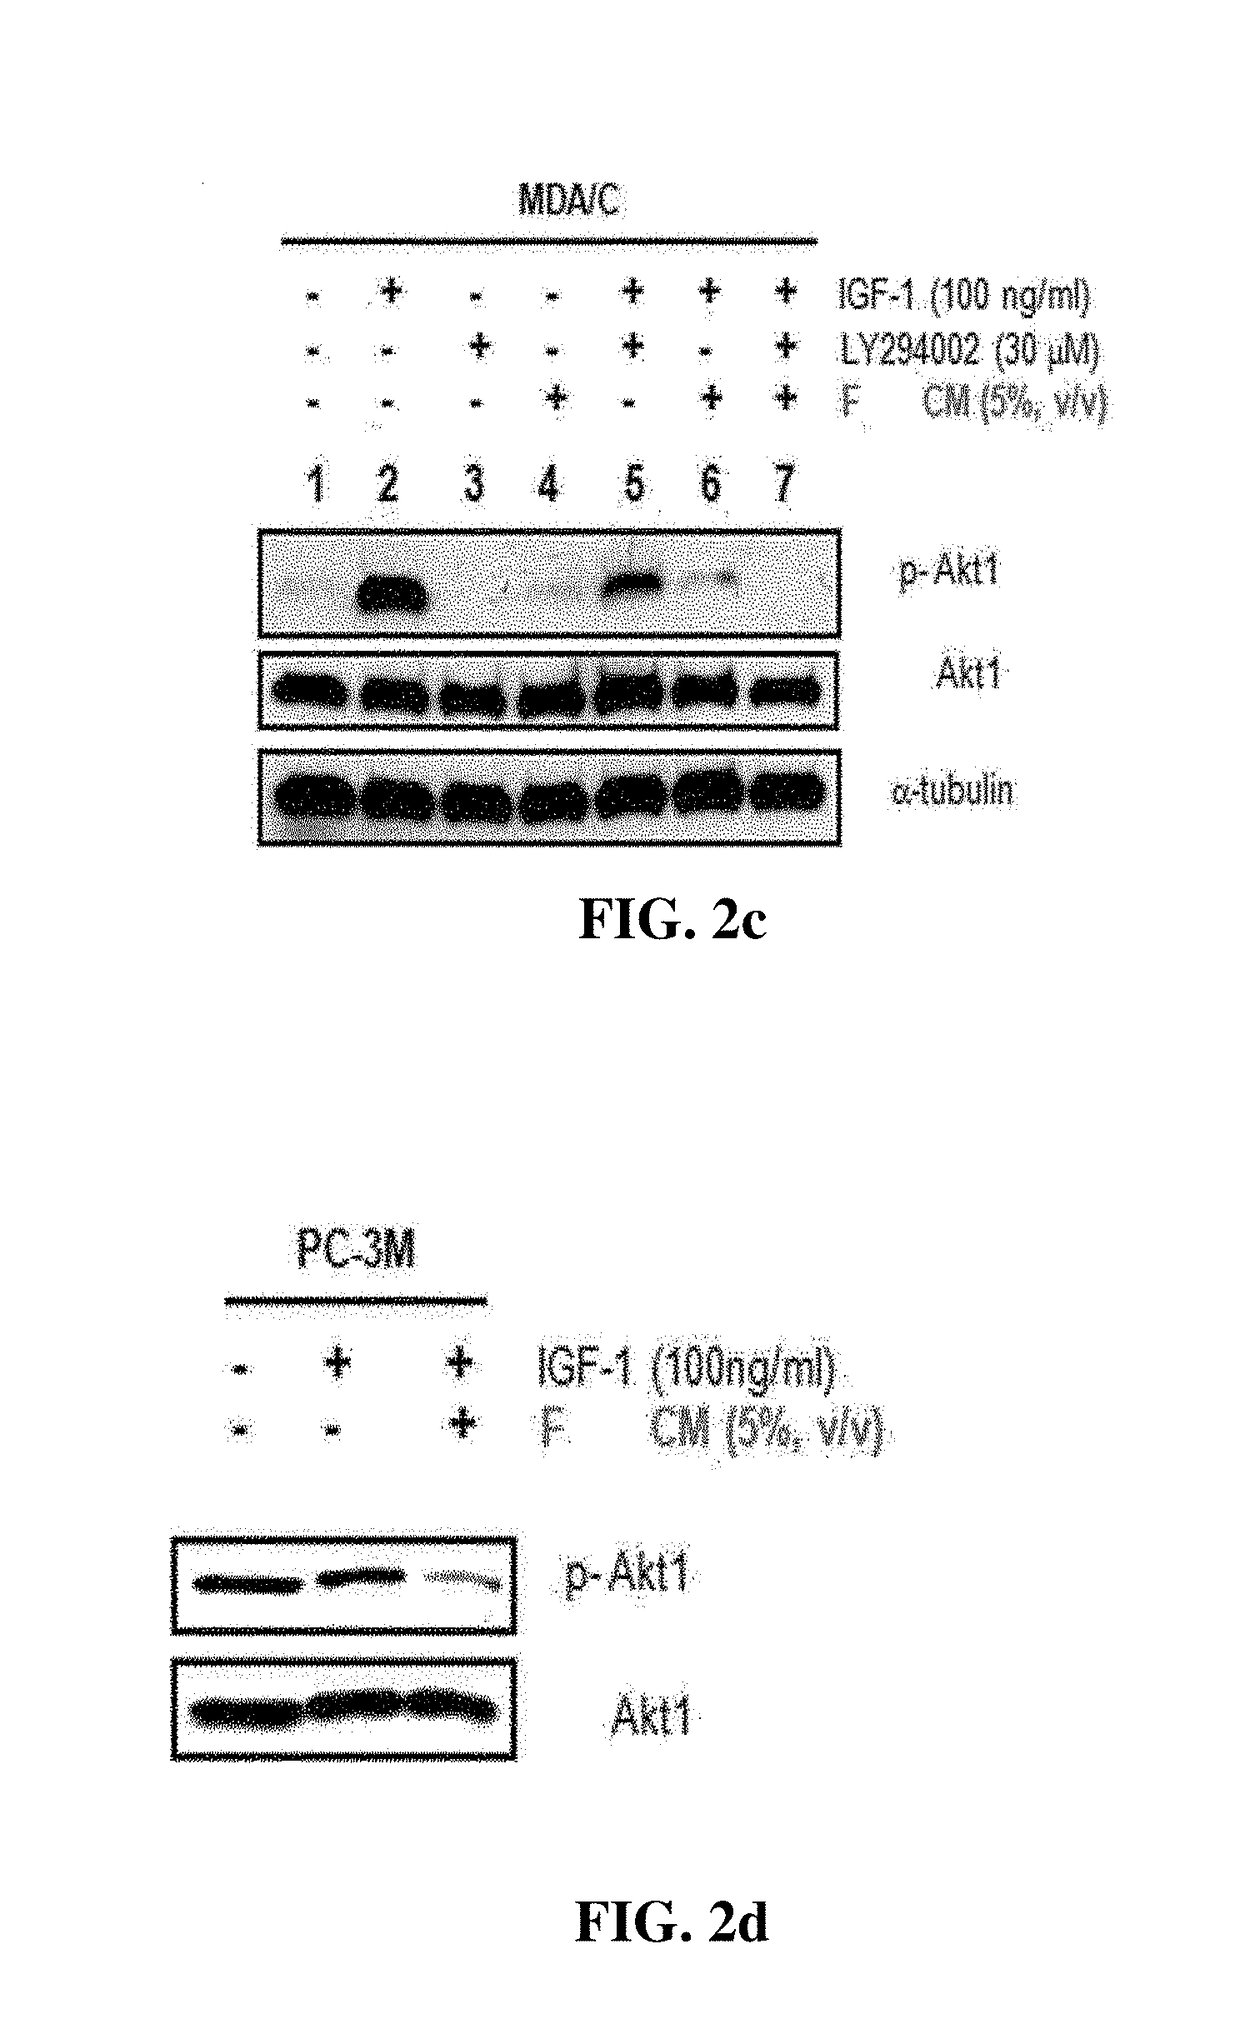 Pharmaceutical composition for preventing and treating cancer or cancer metastasis, containing fstl1 protein as active ingredient